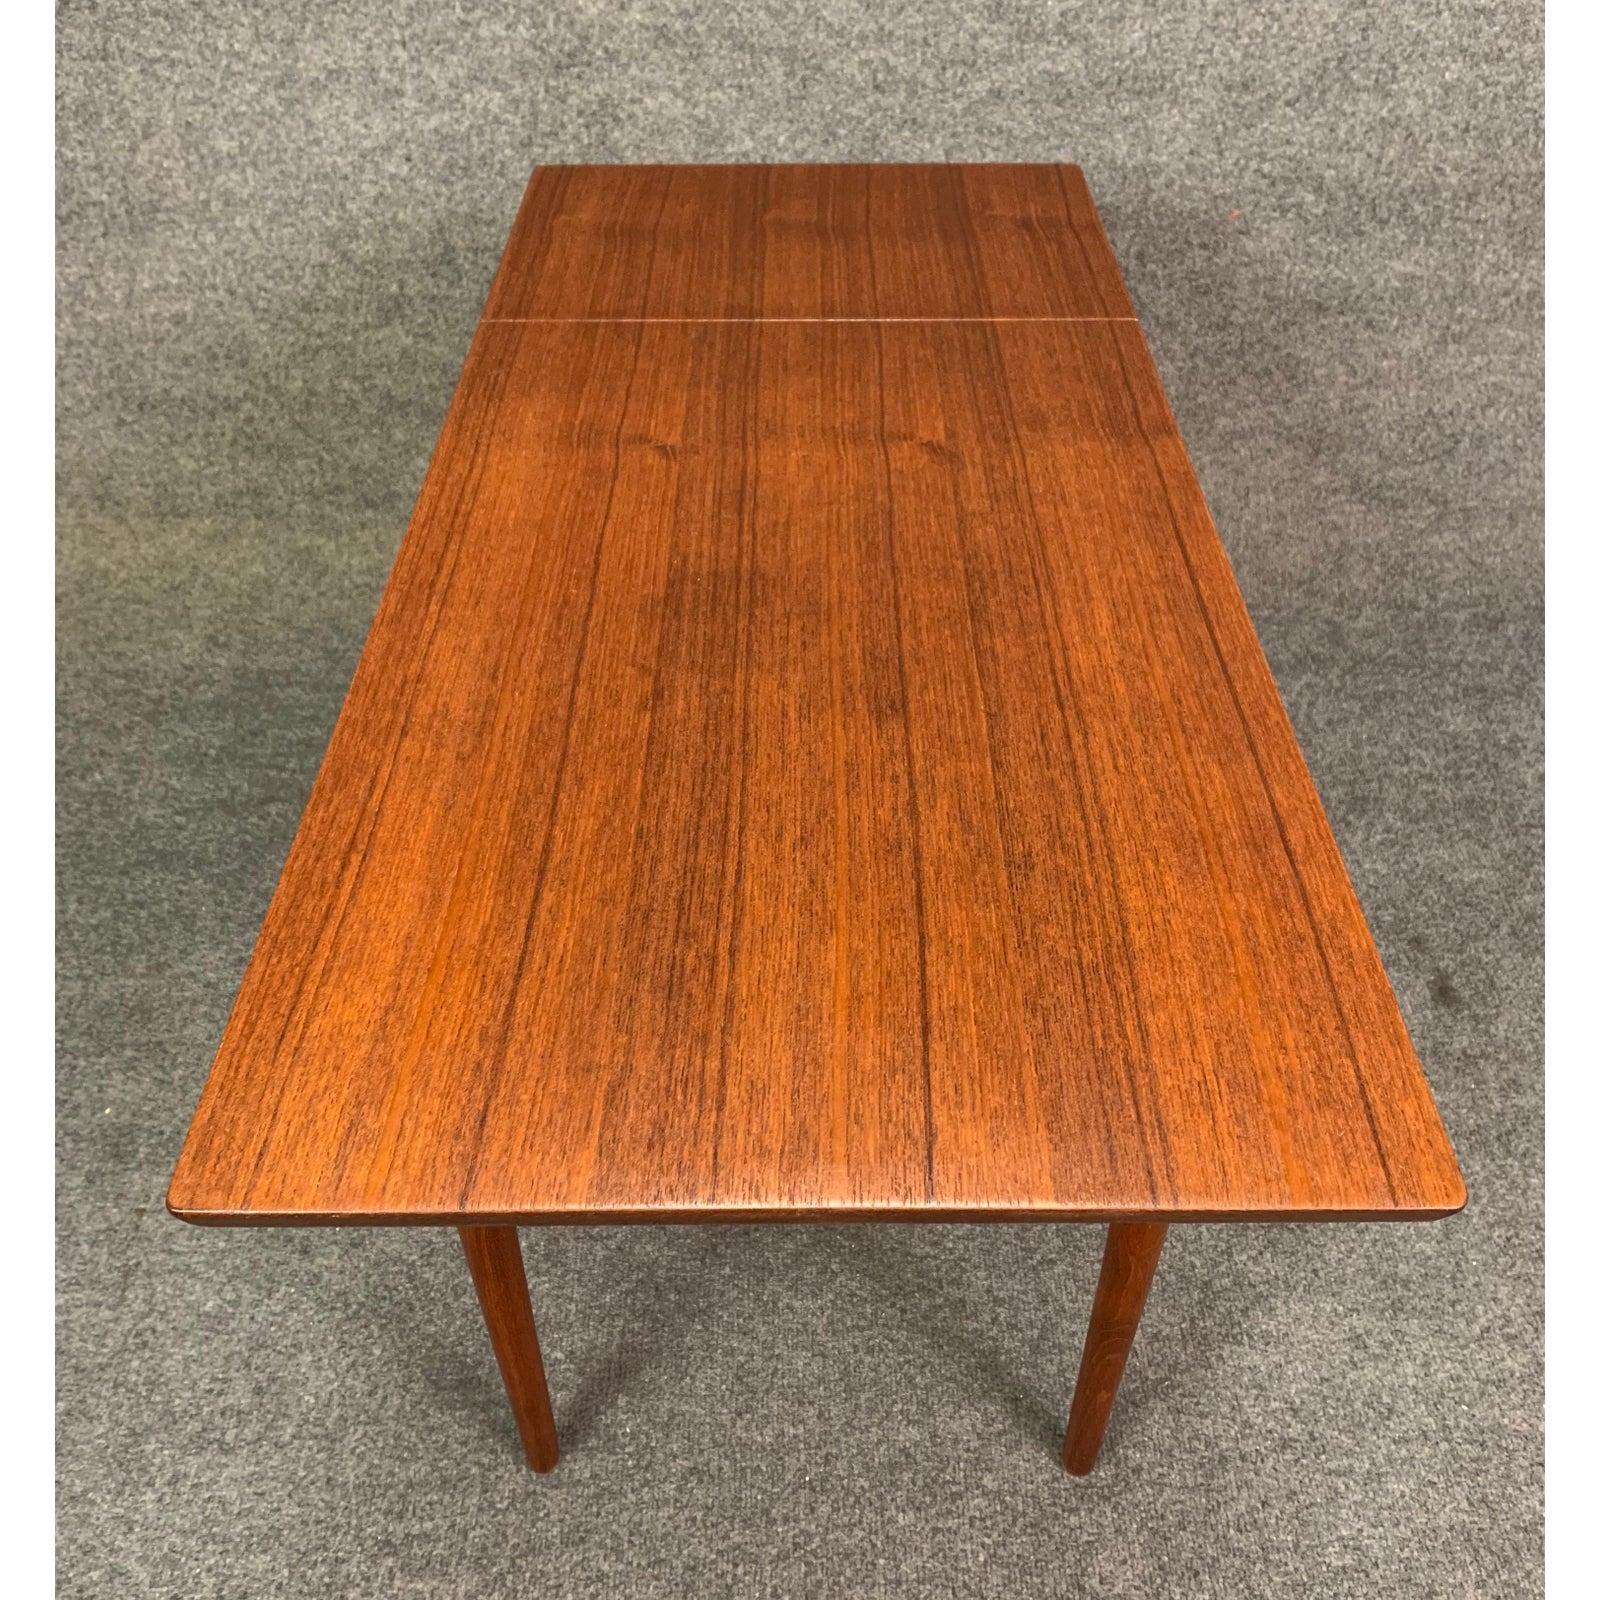 Here is a beautiful Scandinavian Modern sewing table in teak wood recently imported from Denmark to California before its restoration.
This lovely end table features a slide top with a drop leaf, a drawer with compartments and a pullout wicker